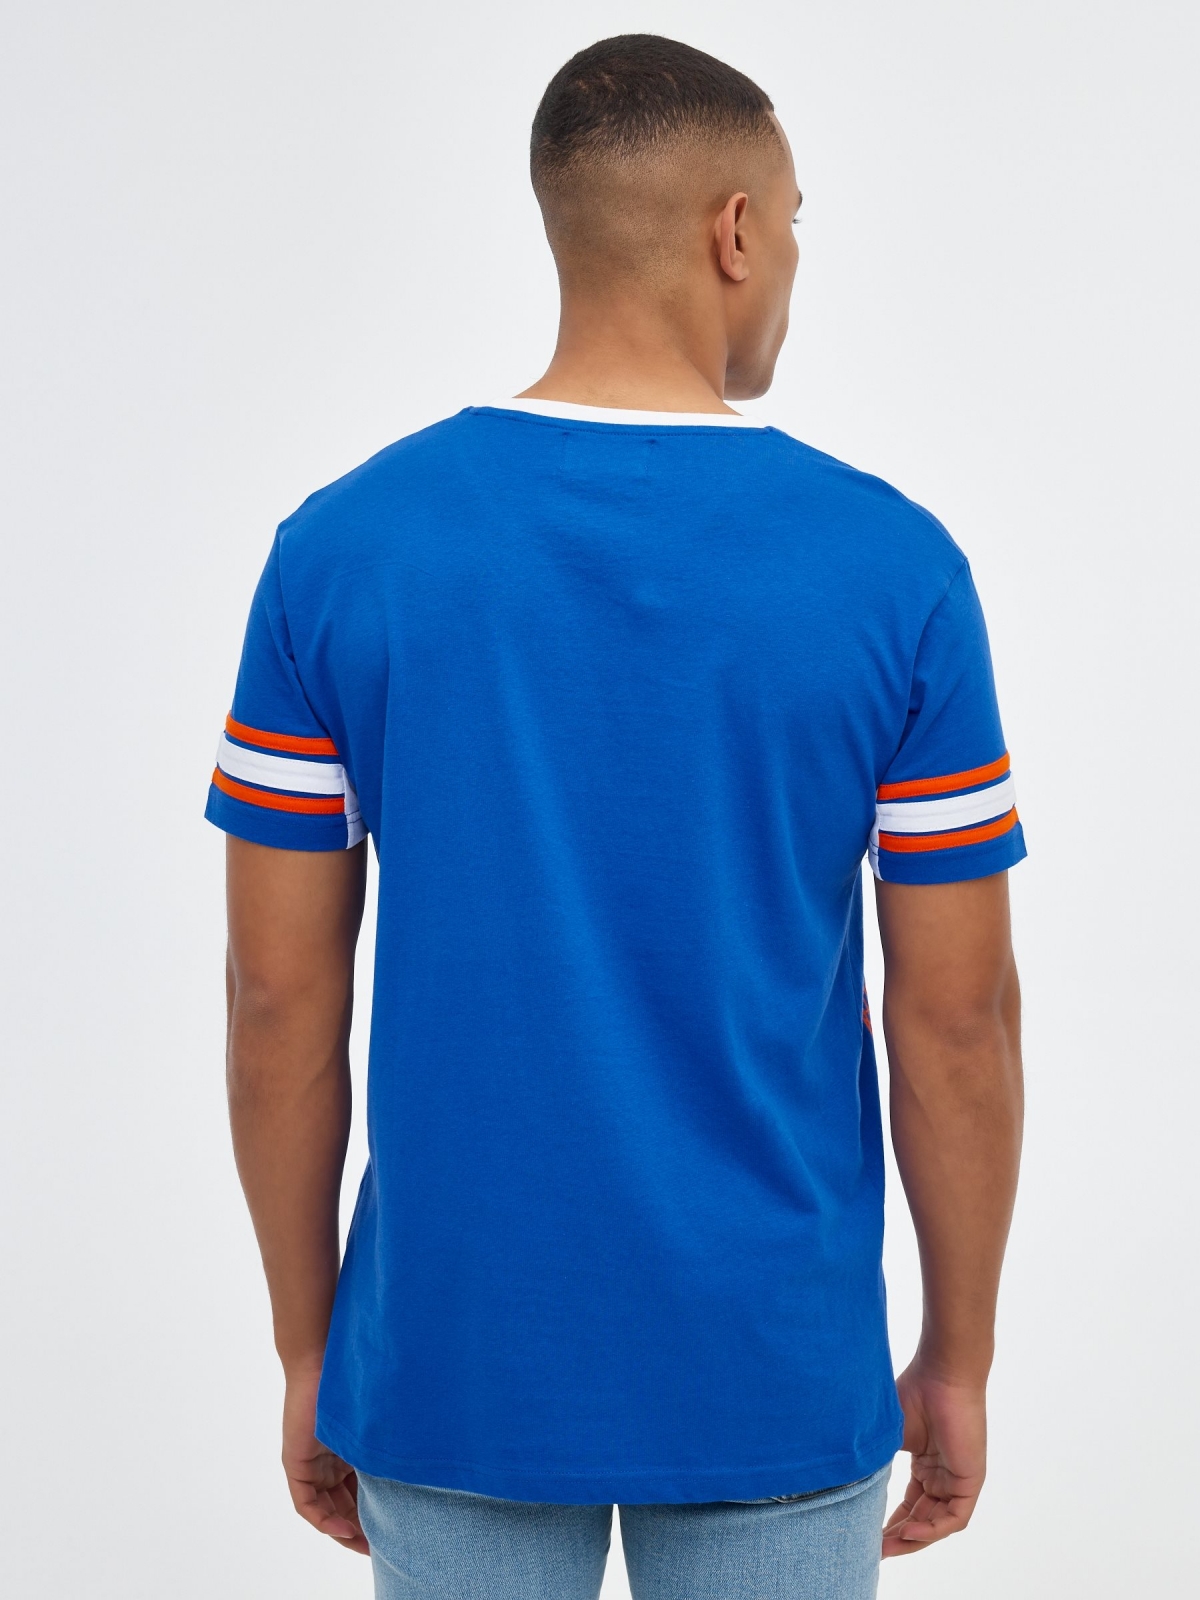 Sports T-shirt electric blue middle back view